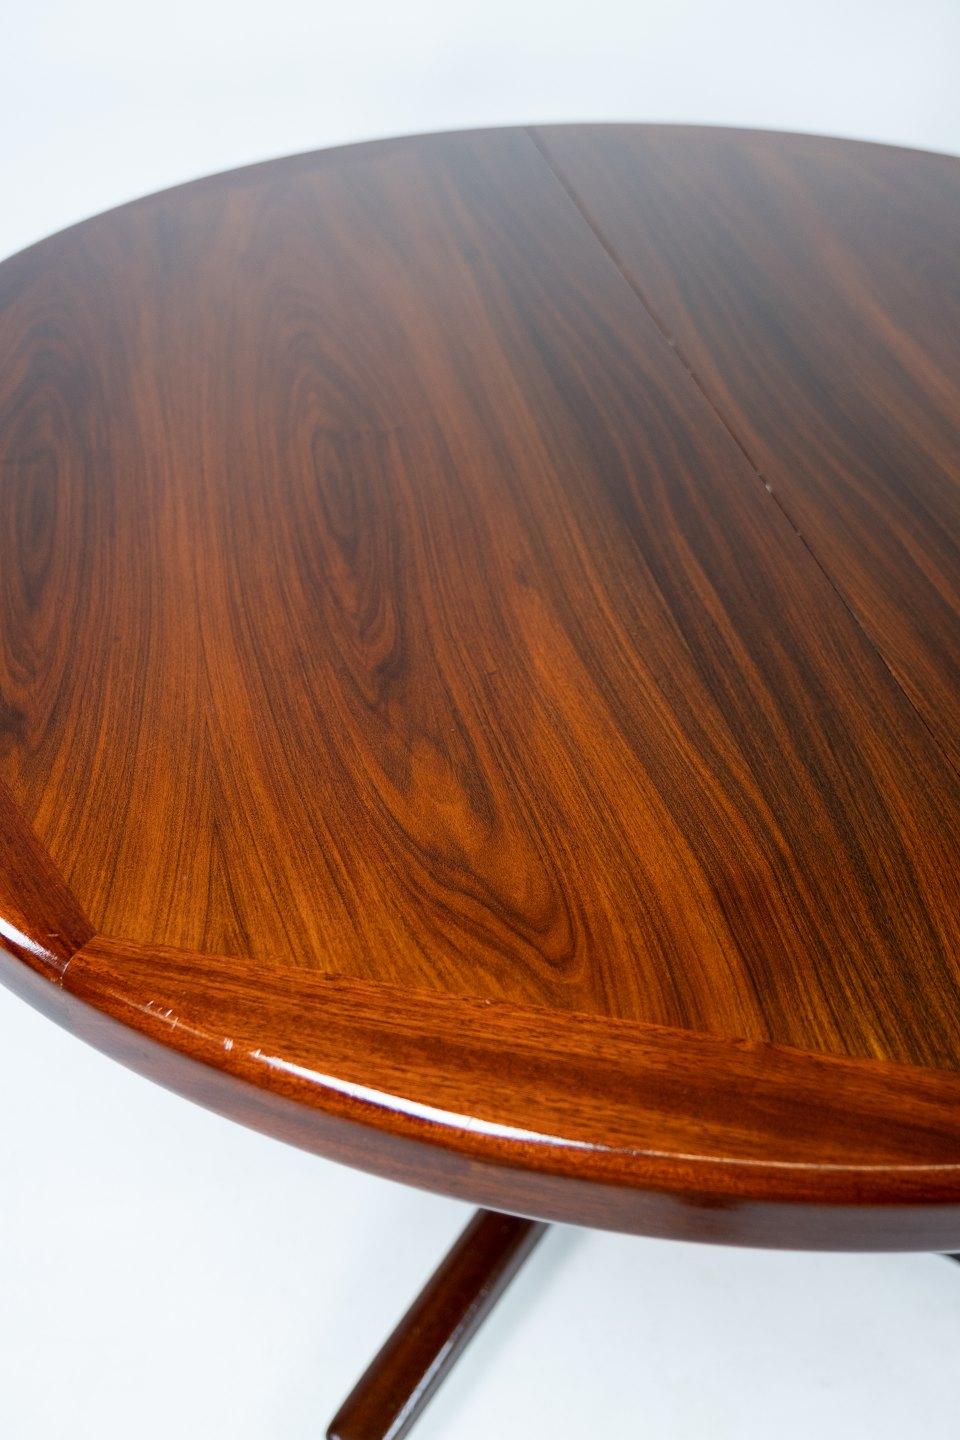 Mid-Century Modern Dining Table Made In Rosewood By Vejle Furniture From 1960s For Sale